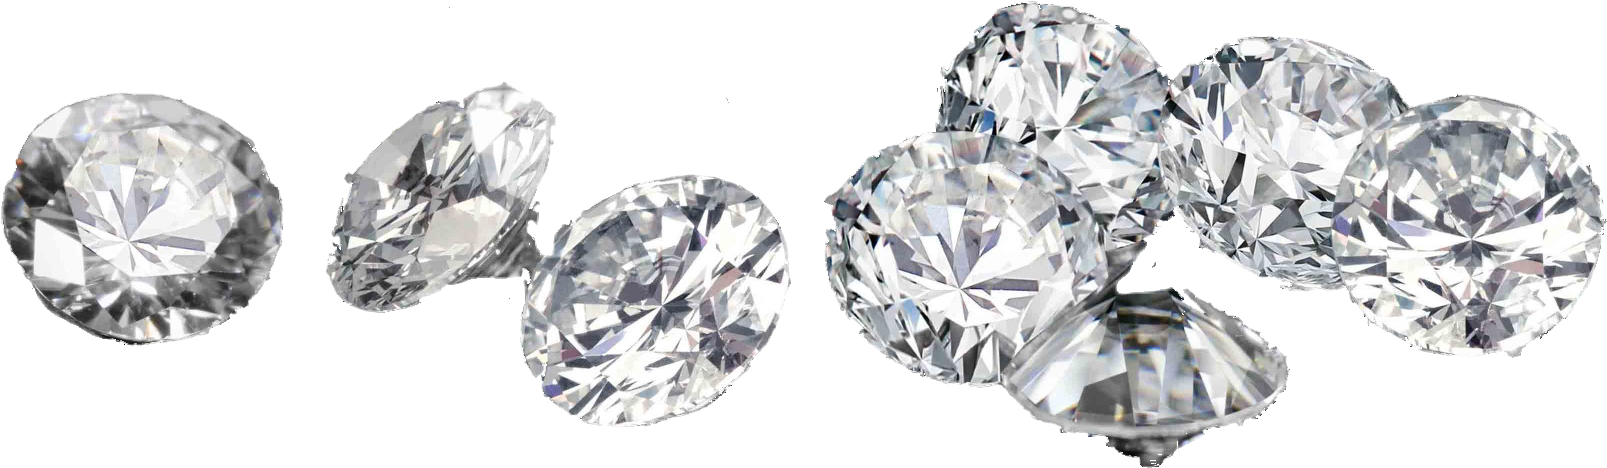 Diamond Computer Icons Ring Clip Art - Transparent Background Diamonds Clipart, Hd Png Download